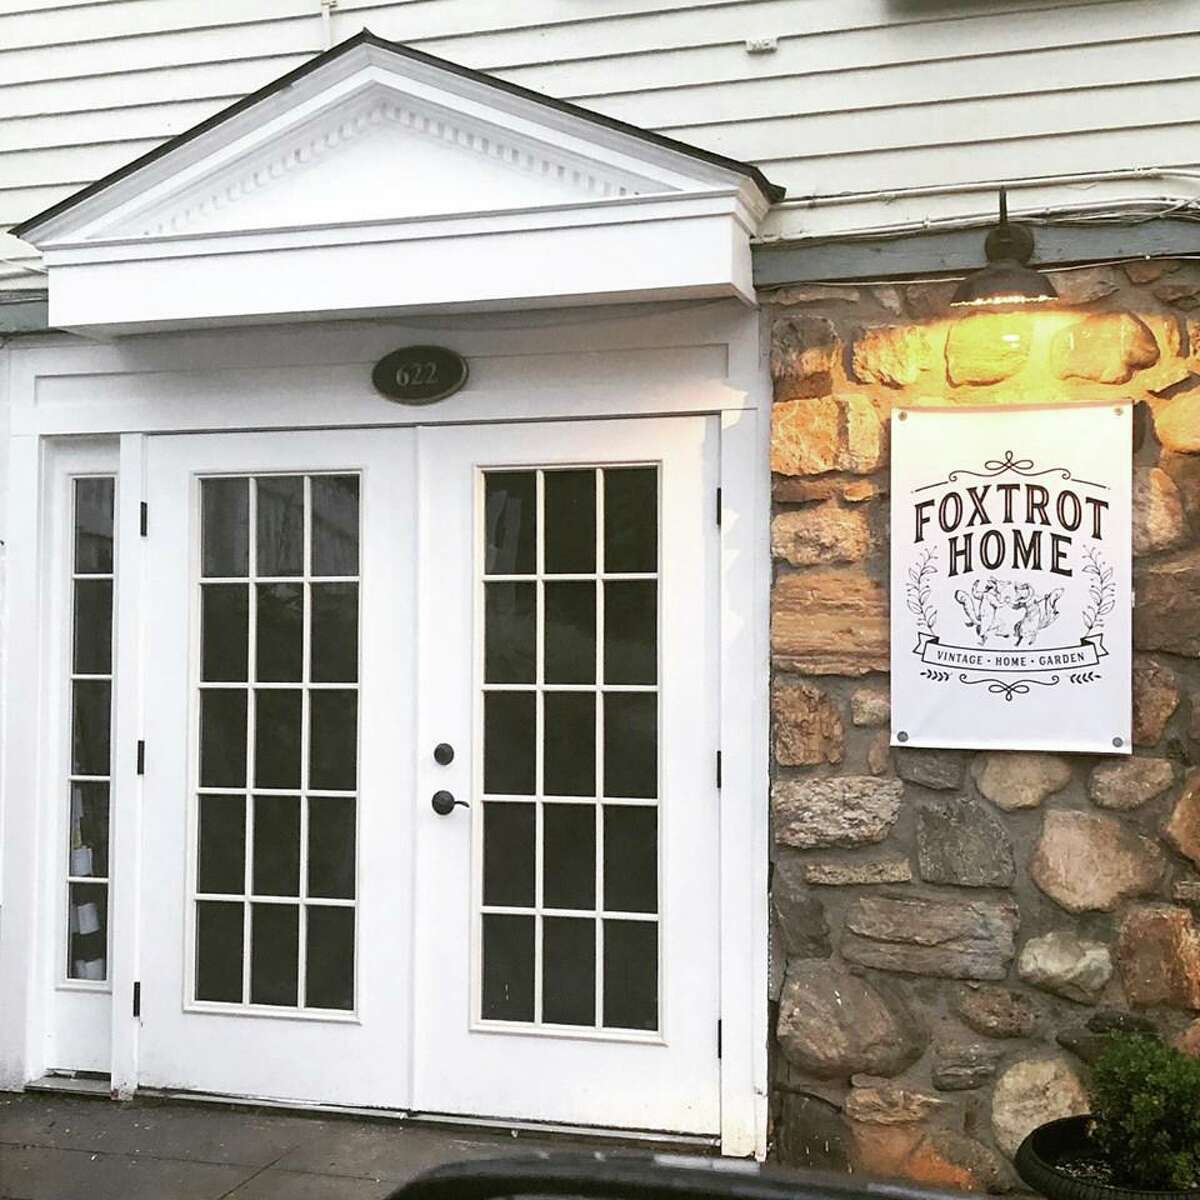 Foxtrot Home has opened up a storefront at 622 Main Street in Ridgefield. The business sells antiques, vintage, gifts, home decor and autentico paint.